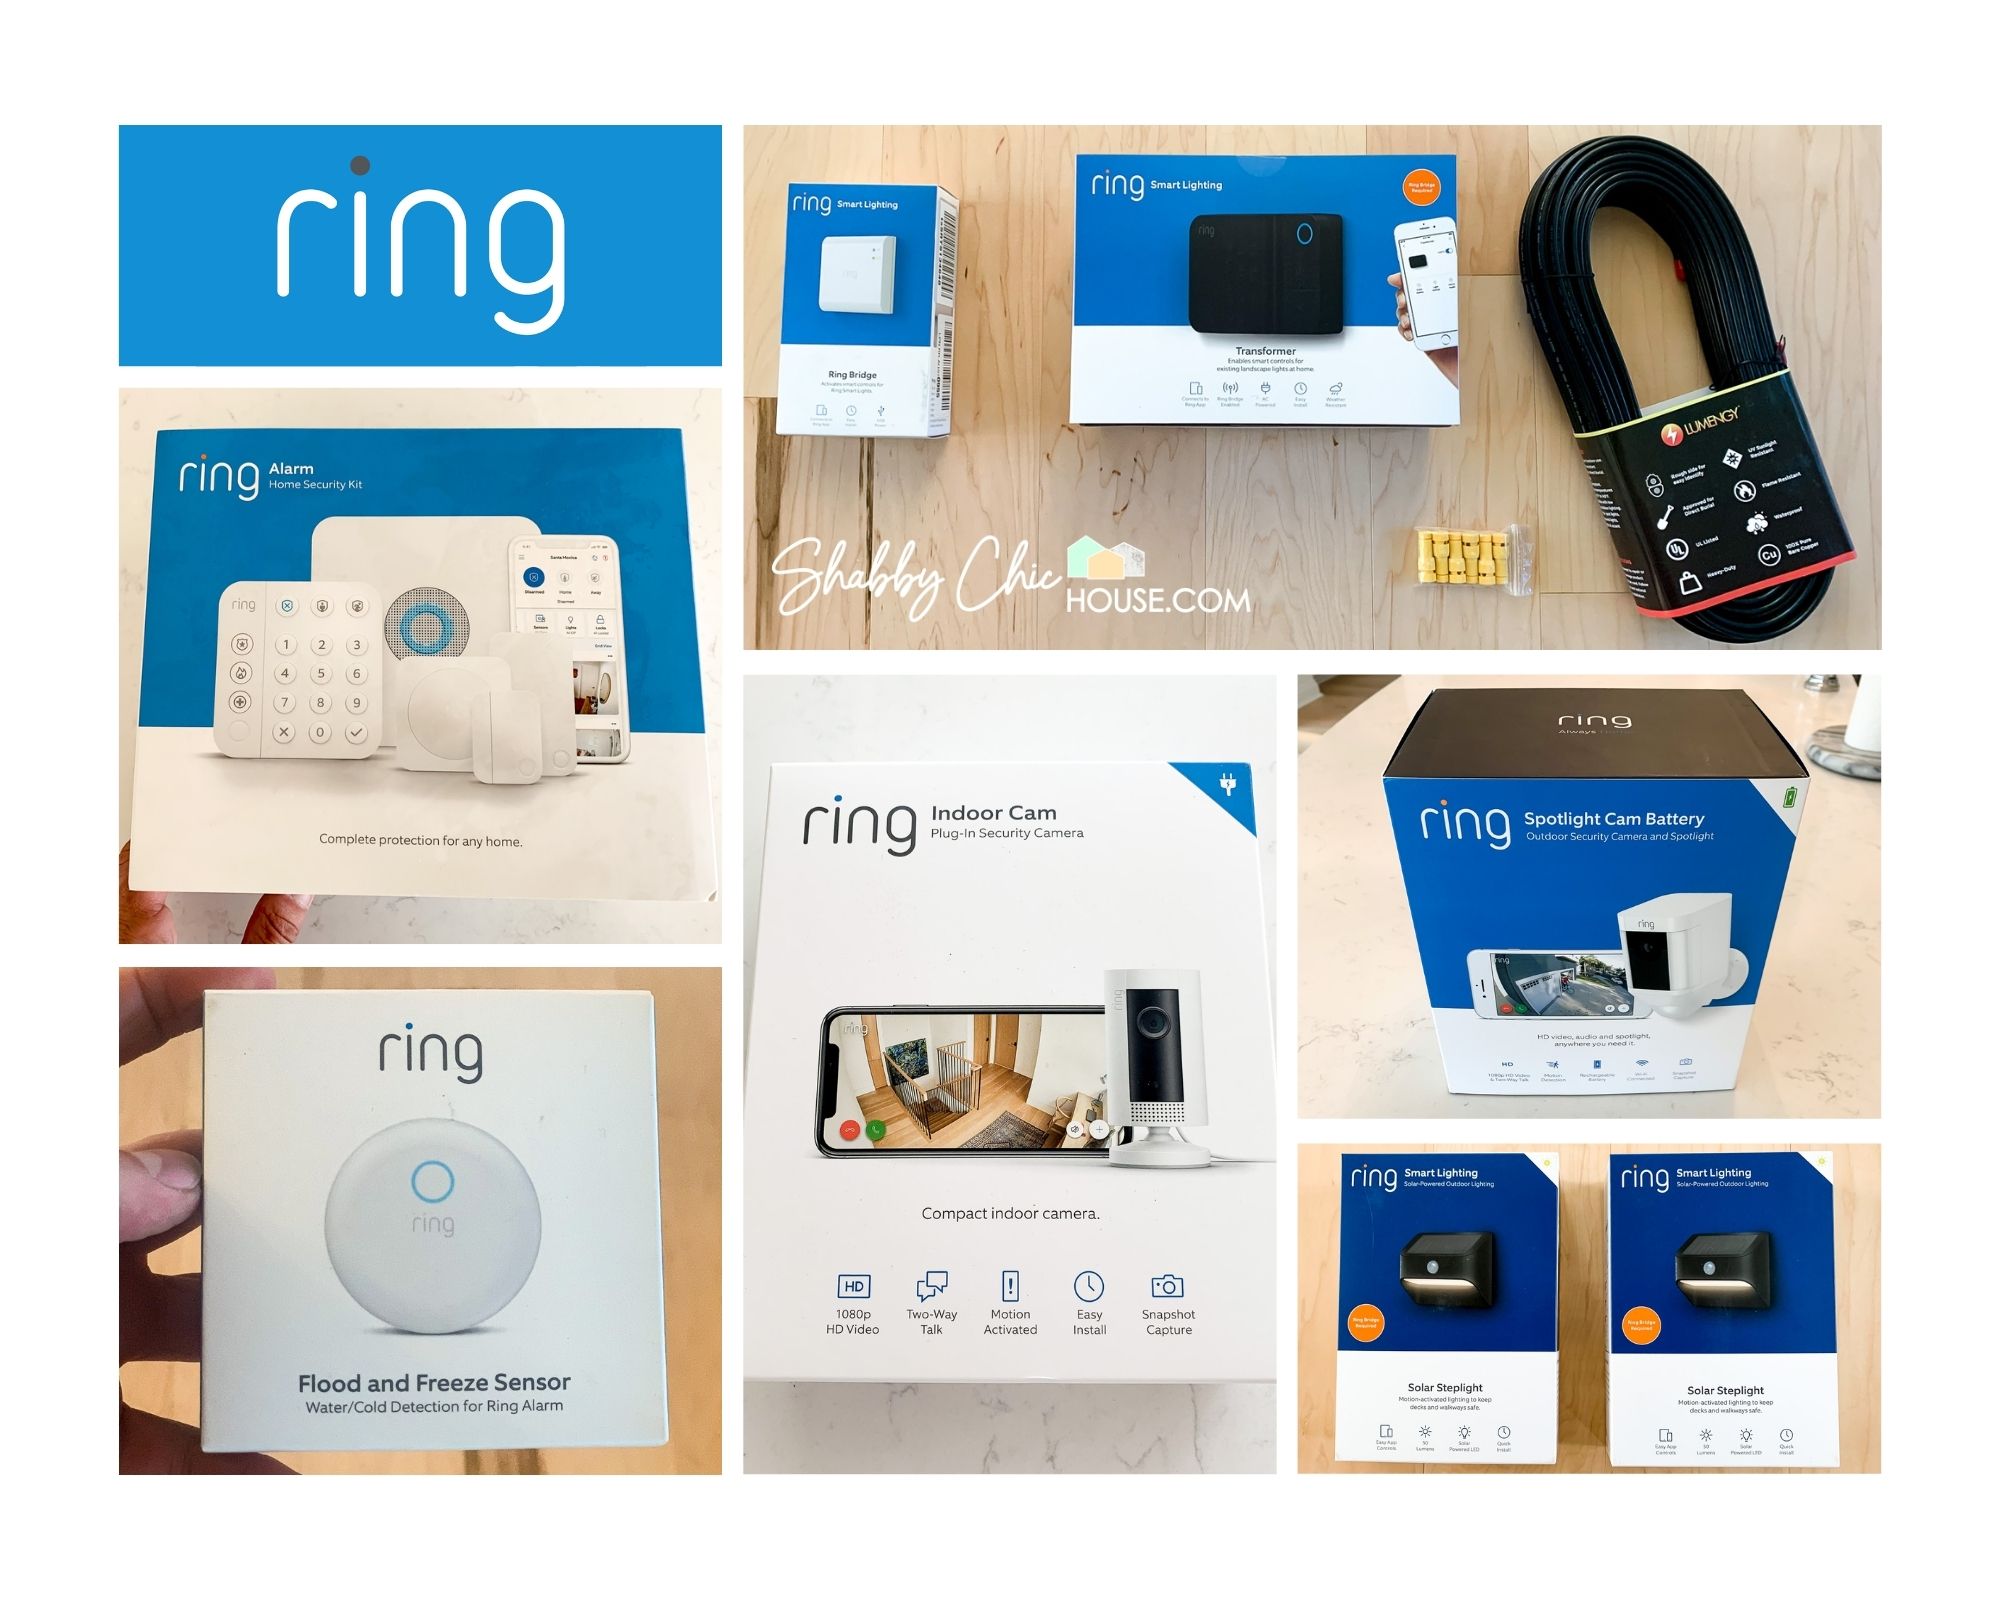 Ring Protect Pro, Subscription Plan with 24/7 Professional Monitoring